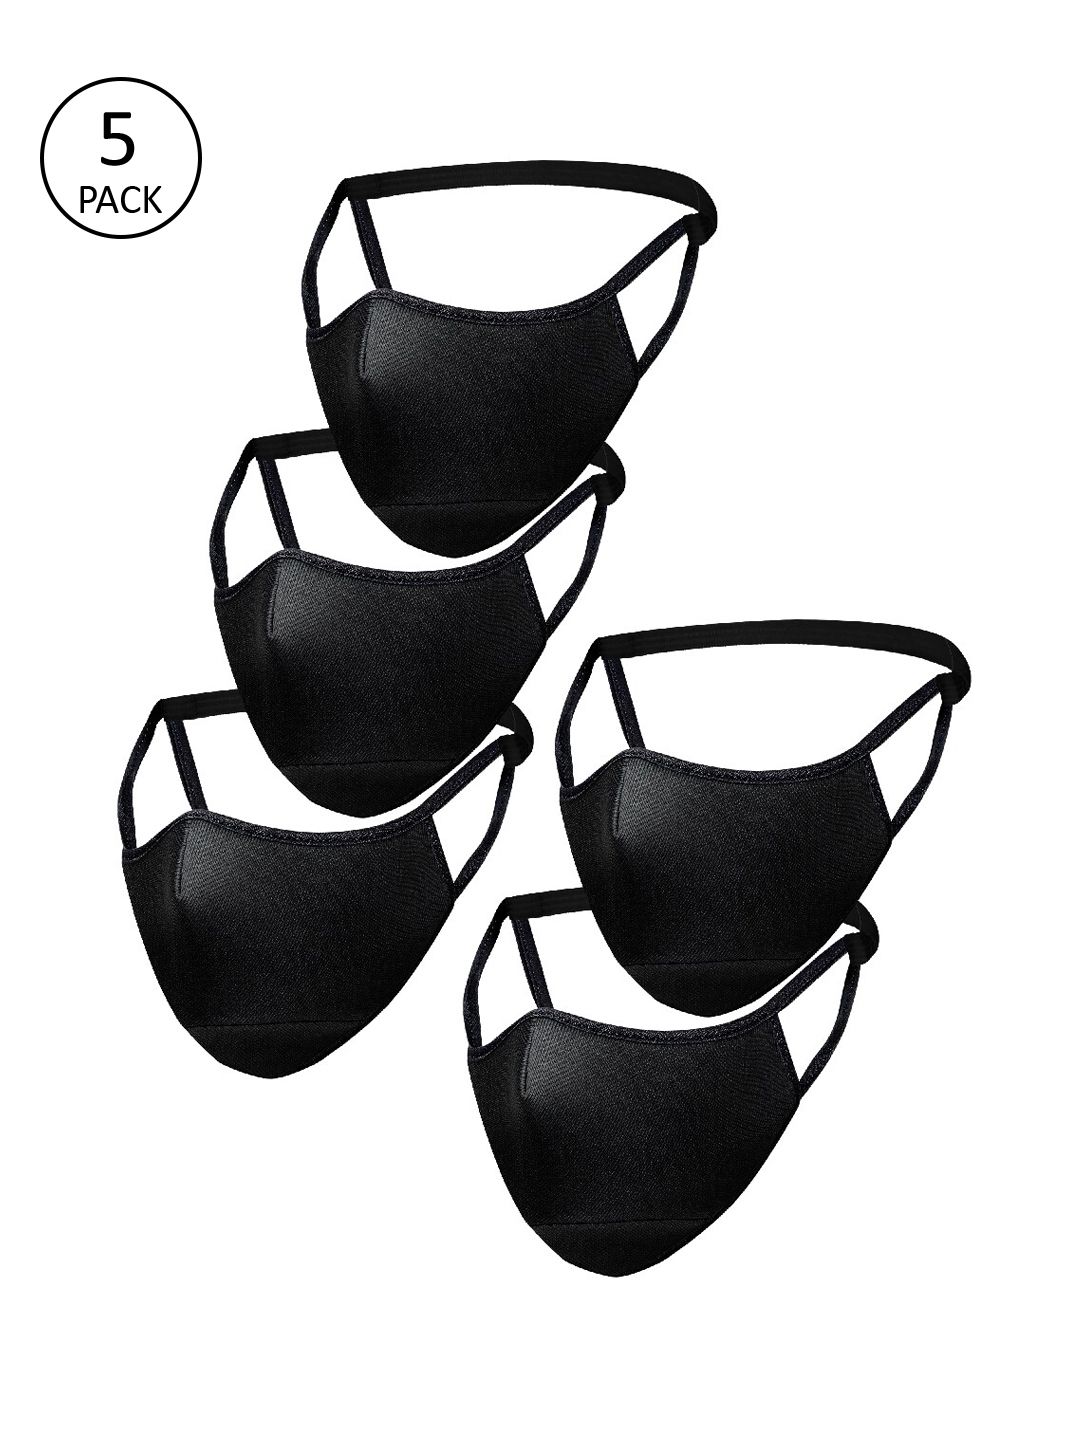 Impulse Unisex 4Ply 5Pcs Protective Outdoor Face Masks Price in India